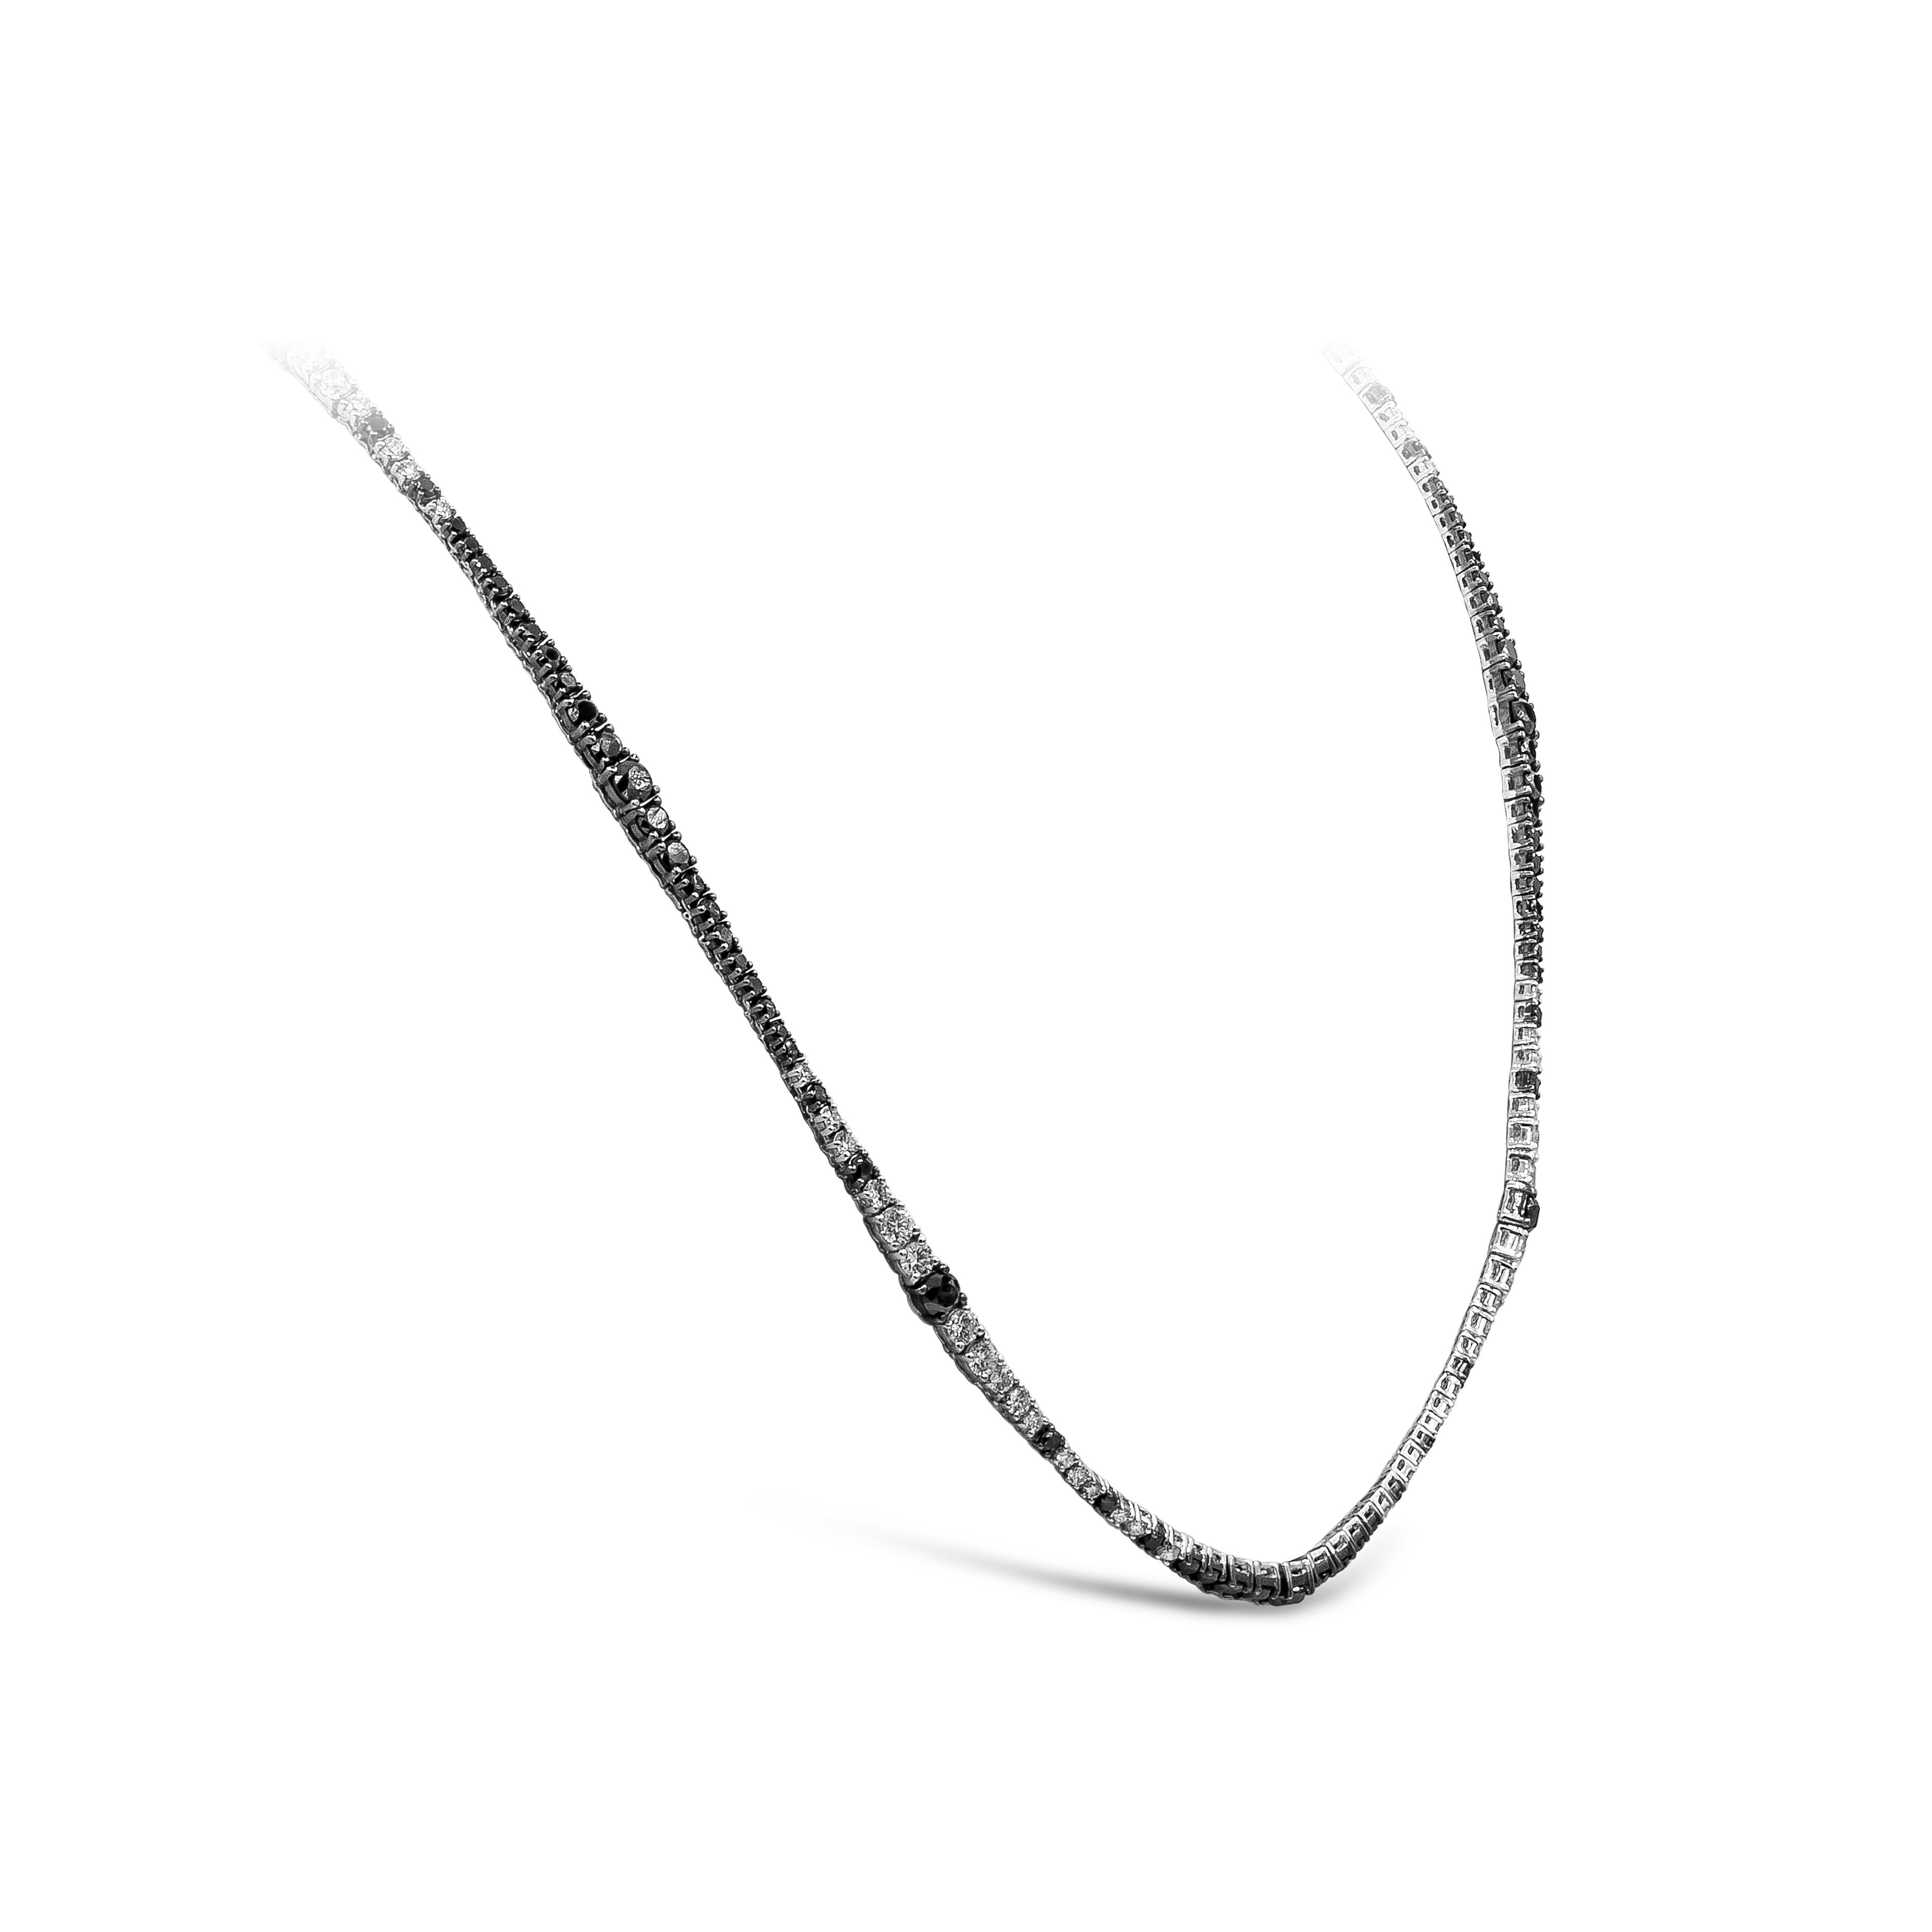 A brilliant long riviera necklace showcasing a row of white and black round diamonds, White diamonds weigh 7.77 carats total and Black diamonds weigh 14.77 carats total. Made with 18K White Gold. 32 3/4 inches in Length

Style available in different